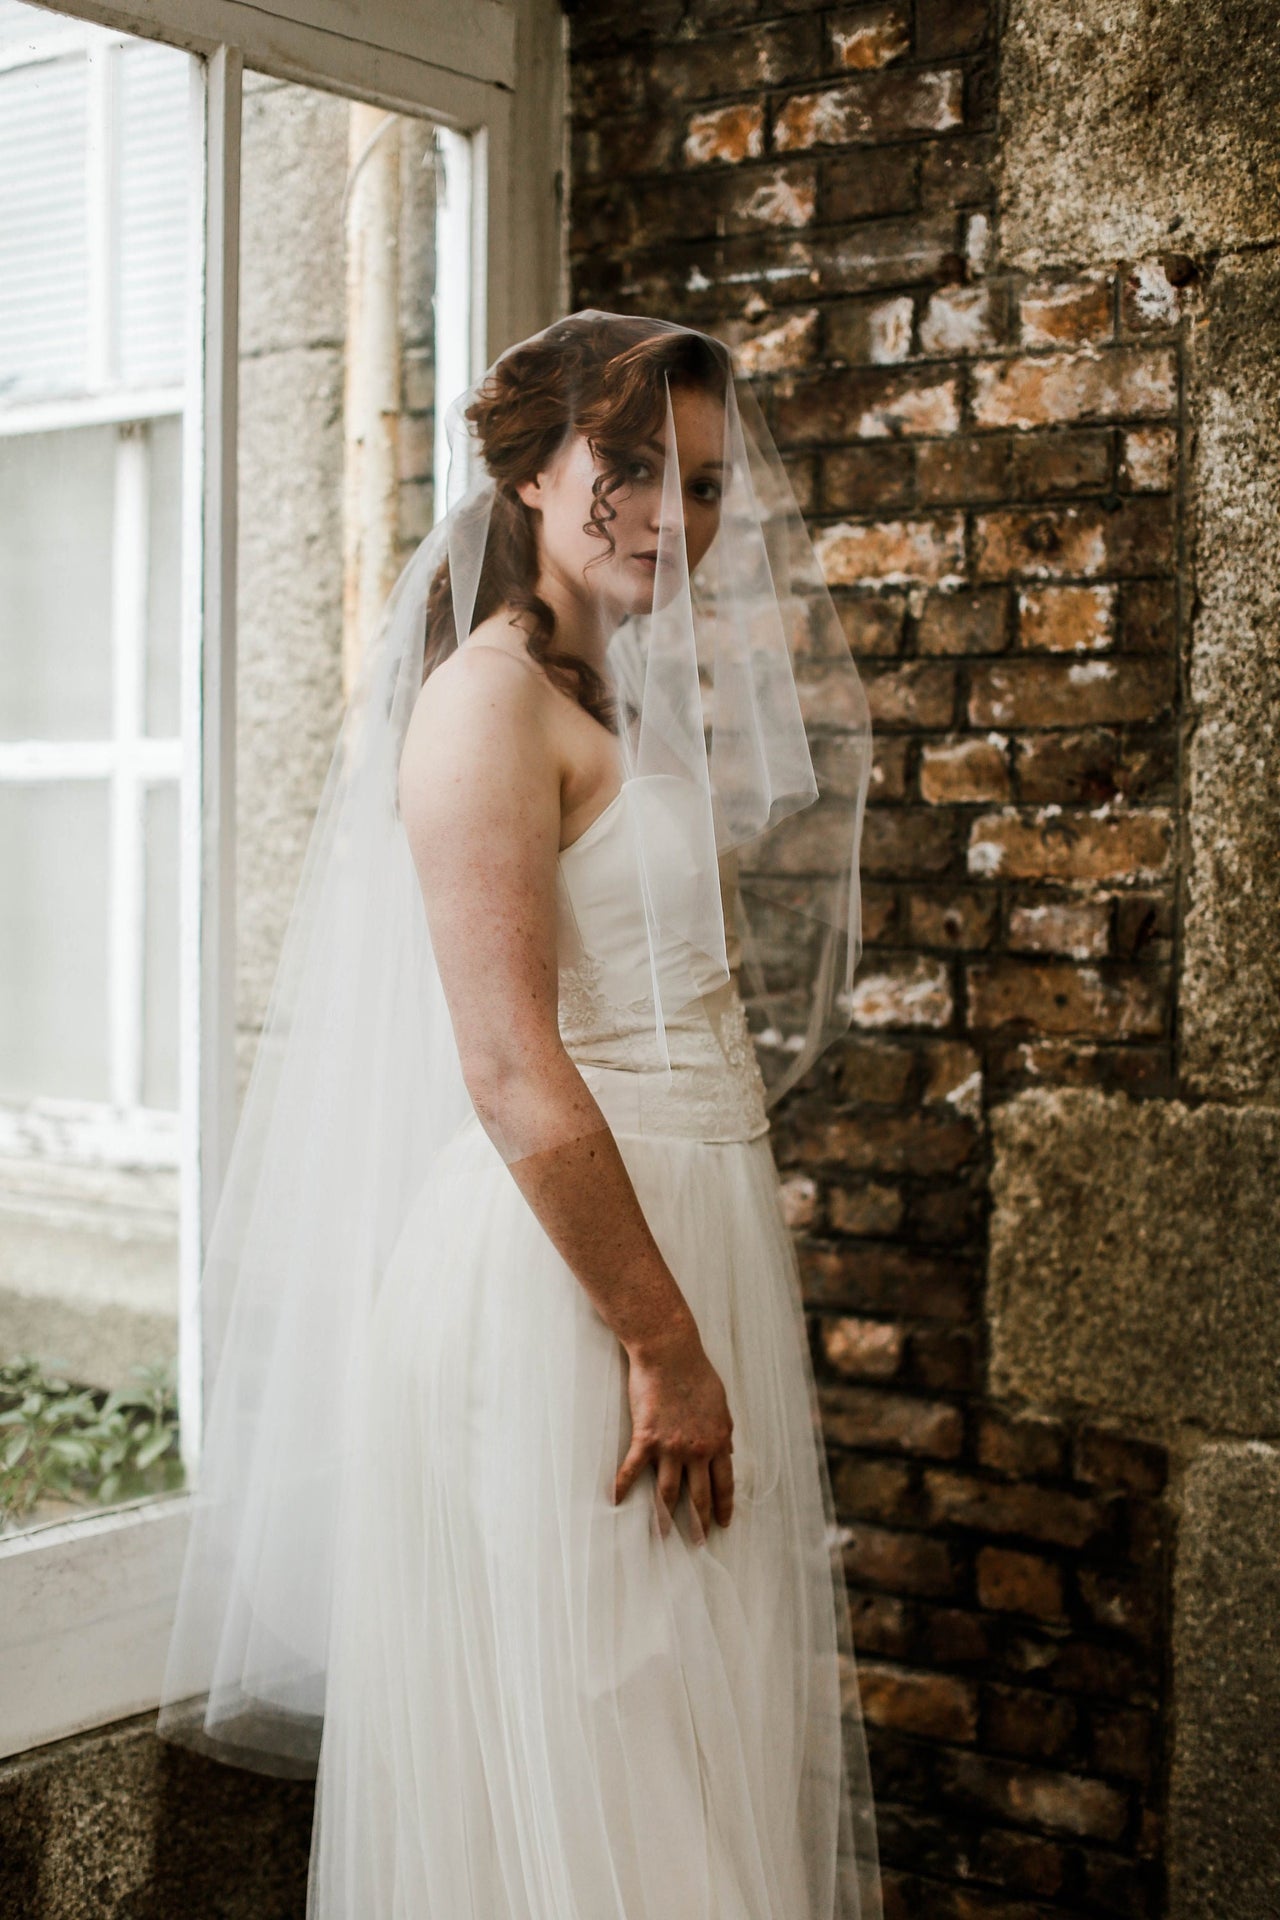 Simple two tier wedding veil with blusher